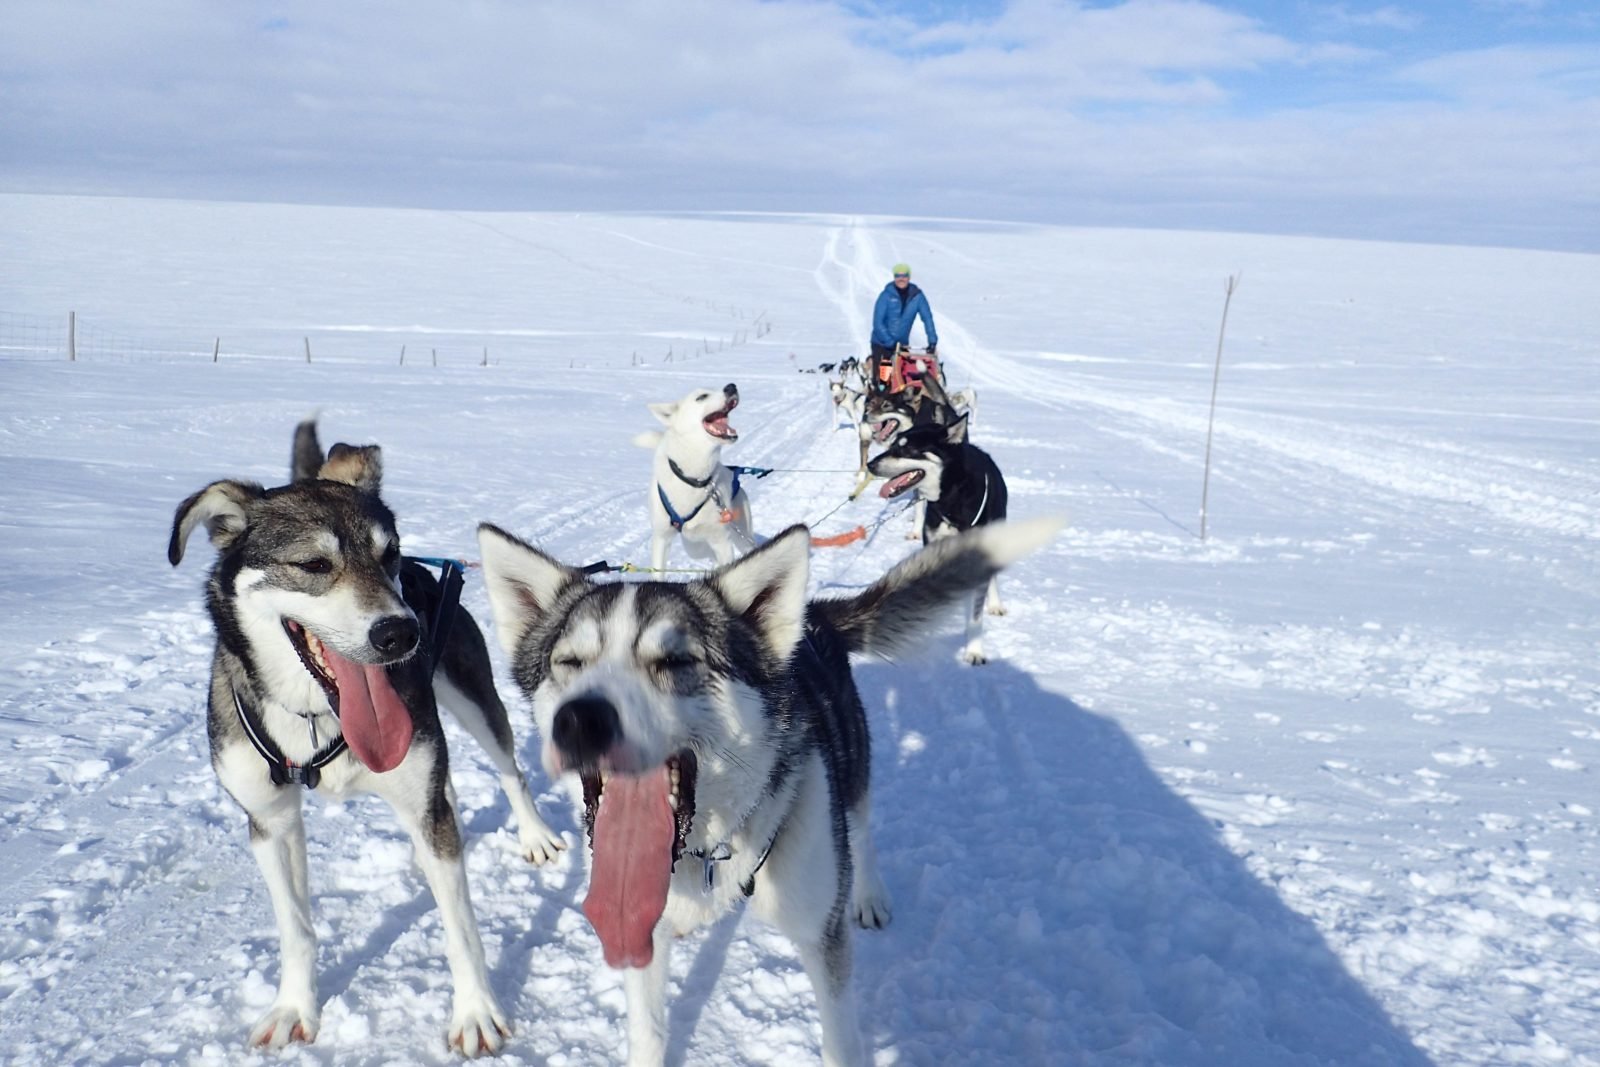 Dog sledding in the Arctic - the front two sled dogs are panting from exertion.